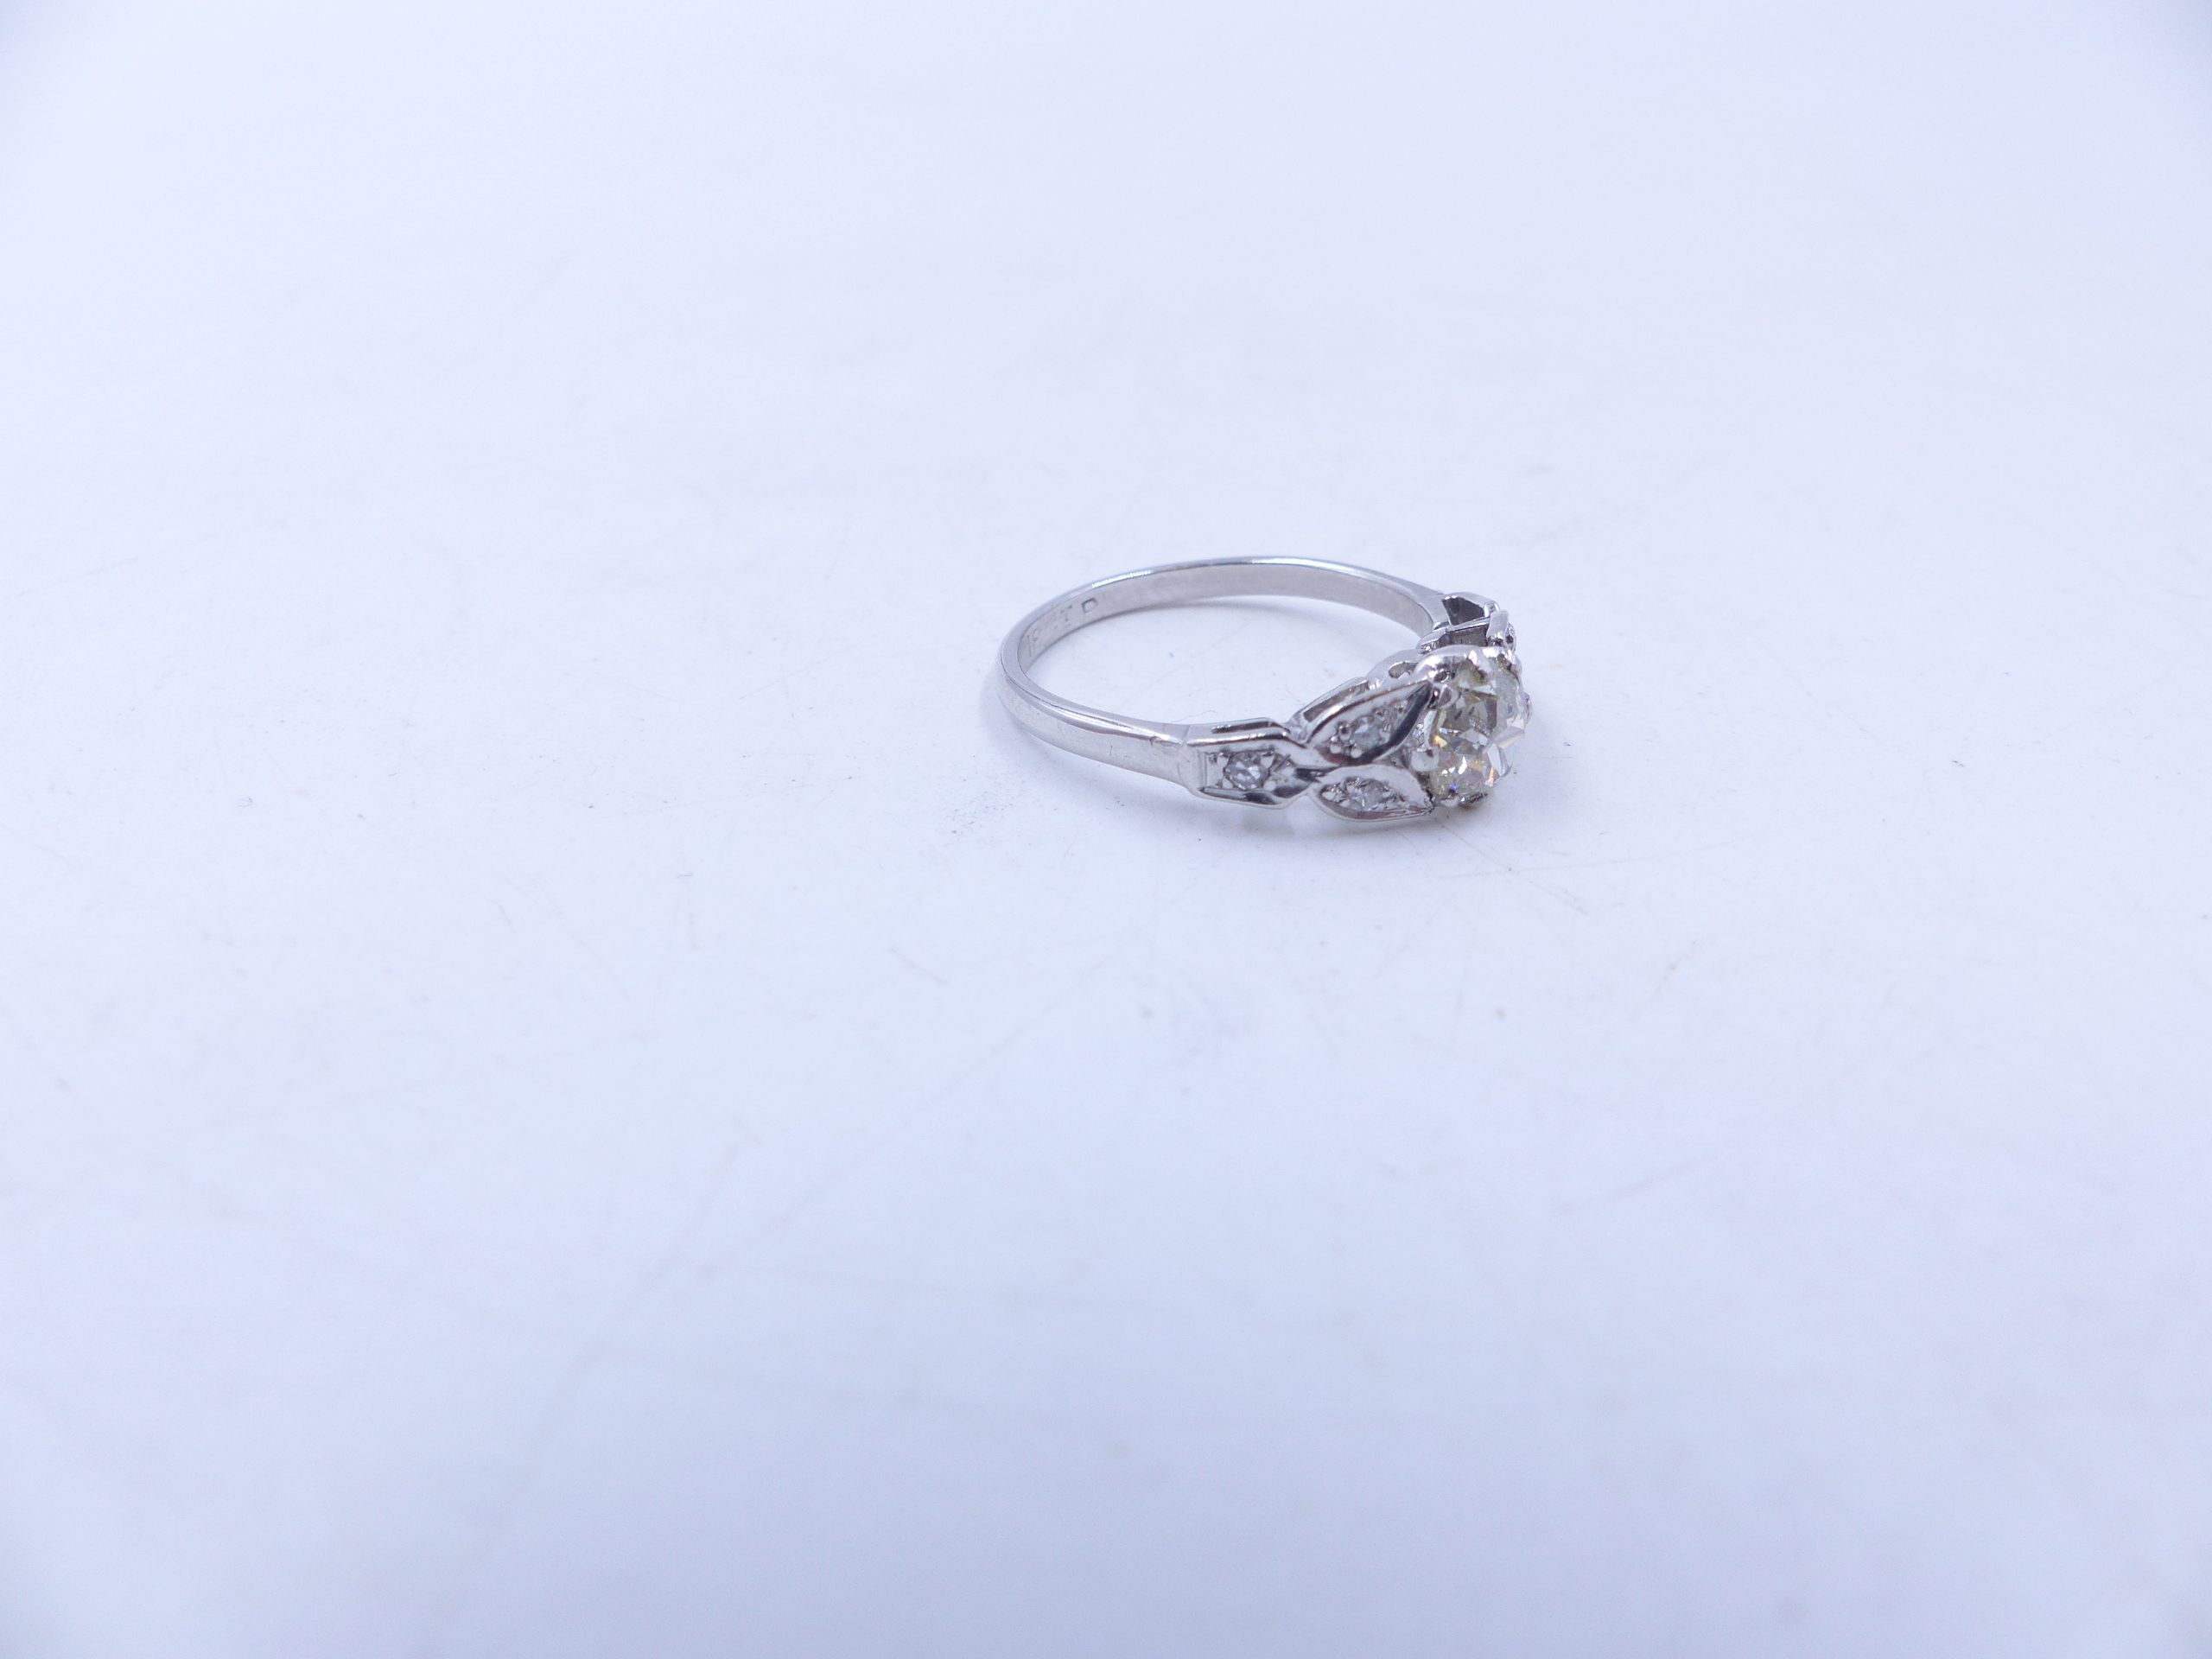 AN 18ct STAMPED OLD CUT DIAMOND RING. THE CENTRAL OLD CUT DIAMOND IS HELD IN AN EIGHT CLAW SETTING - Image 14 of 14